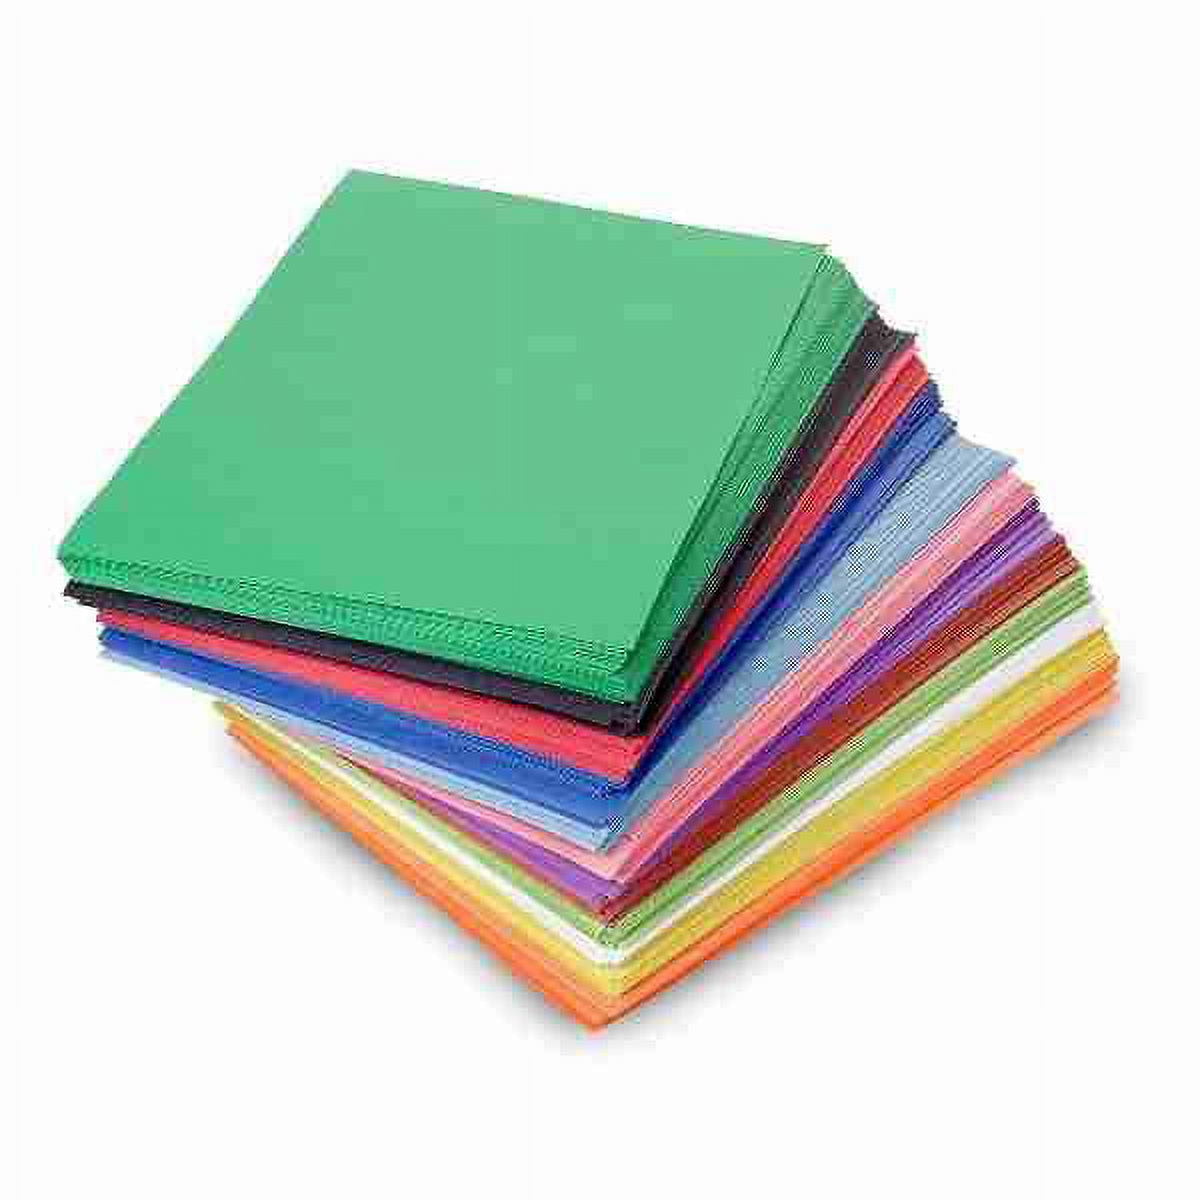 Crayola 12 Assorted Colors Construction Paper - 720 ct